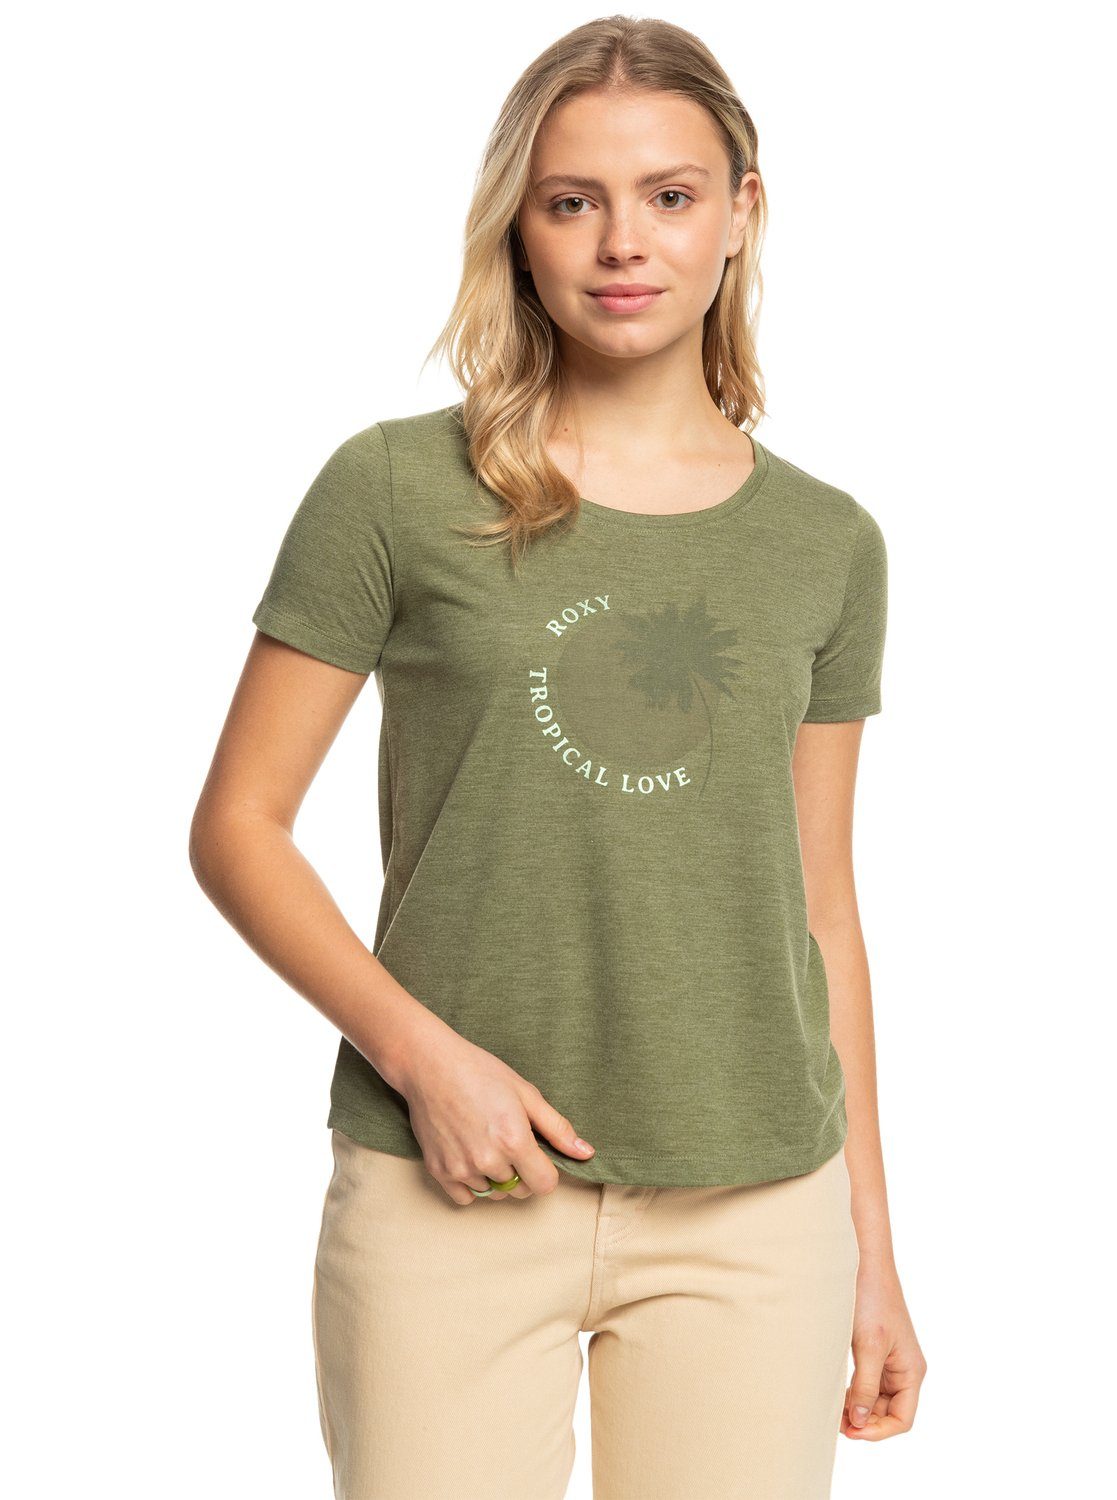 Loden Green Chasing T-Shirt Roxy The Wave